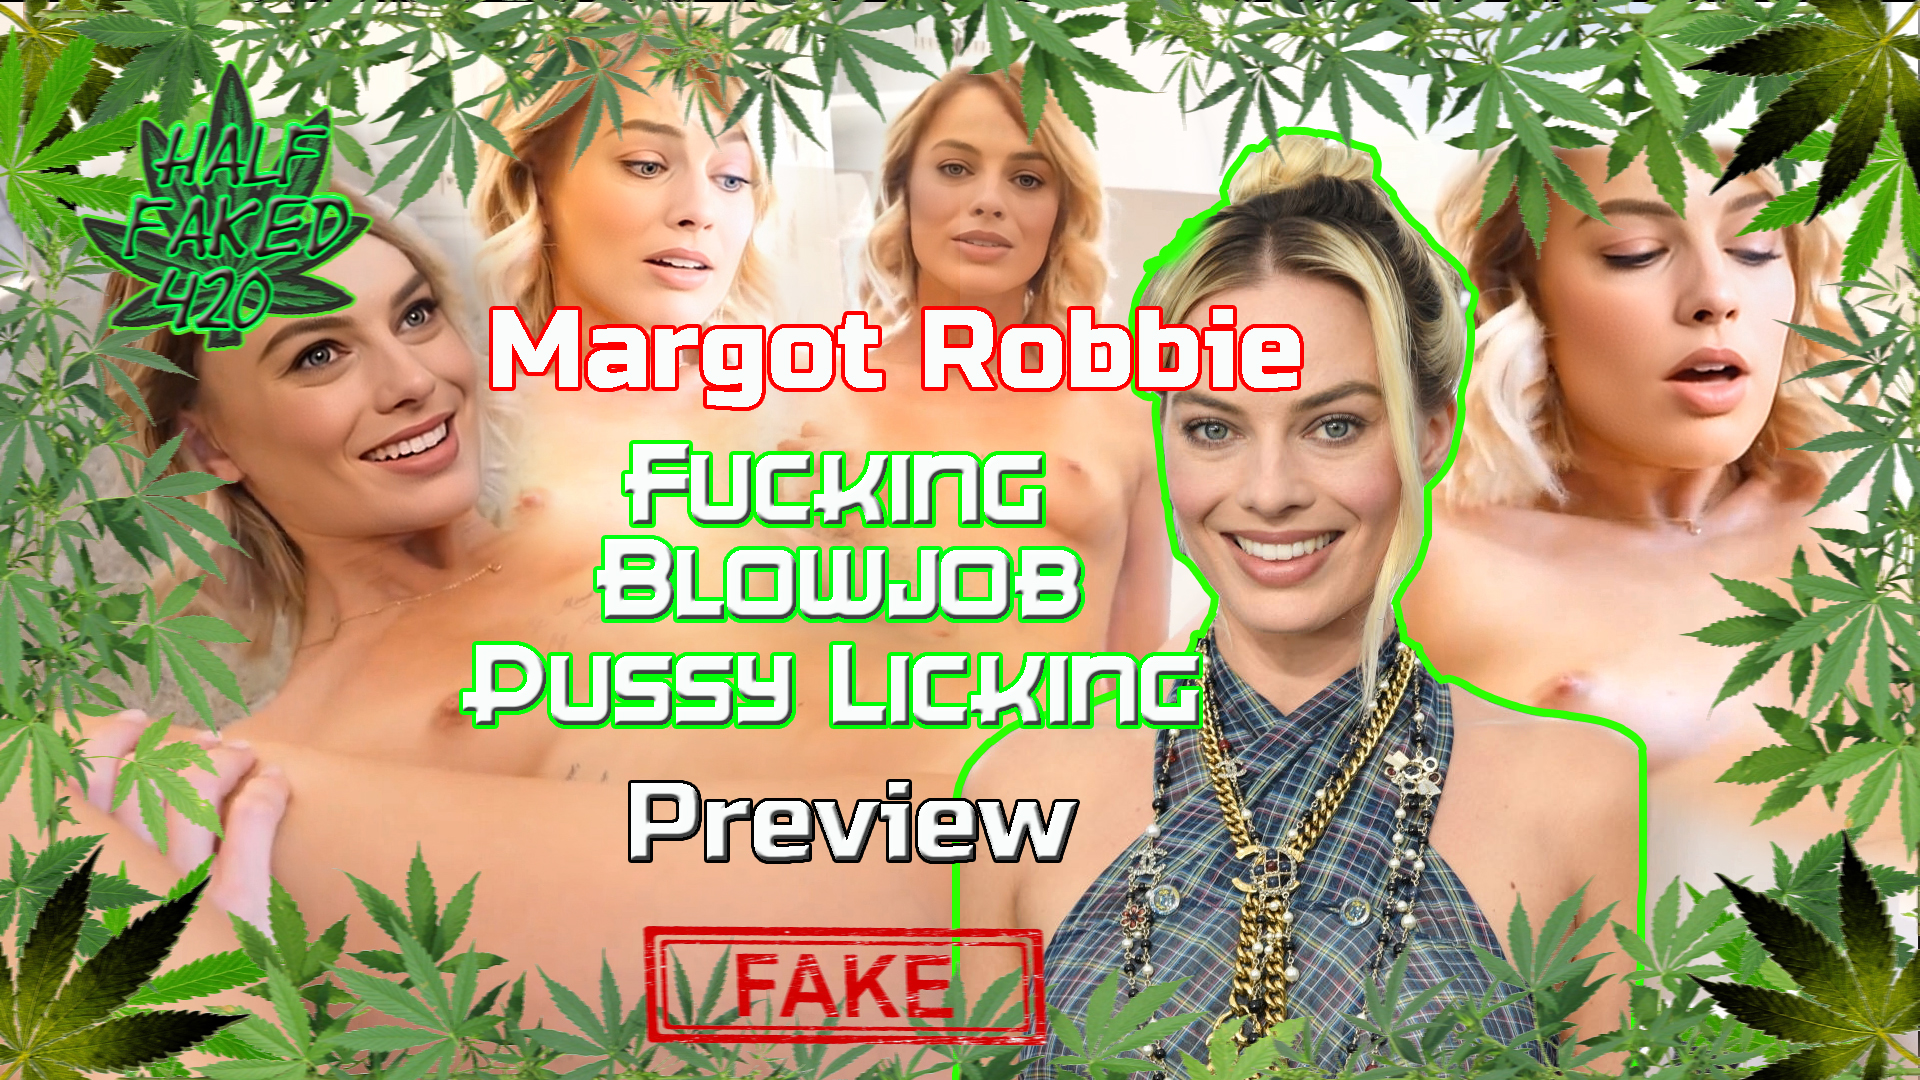 Margot Robbie - Fucking, Blowjob, Pussy Licking | PREVIEW (17:47) | FAKE